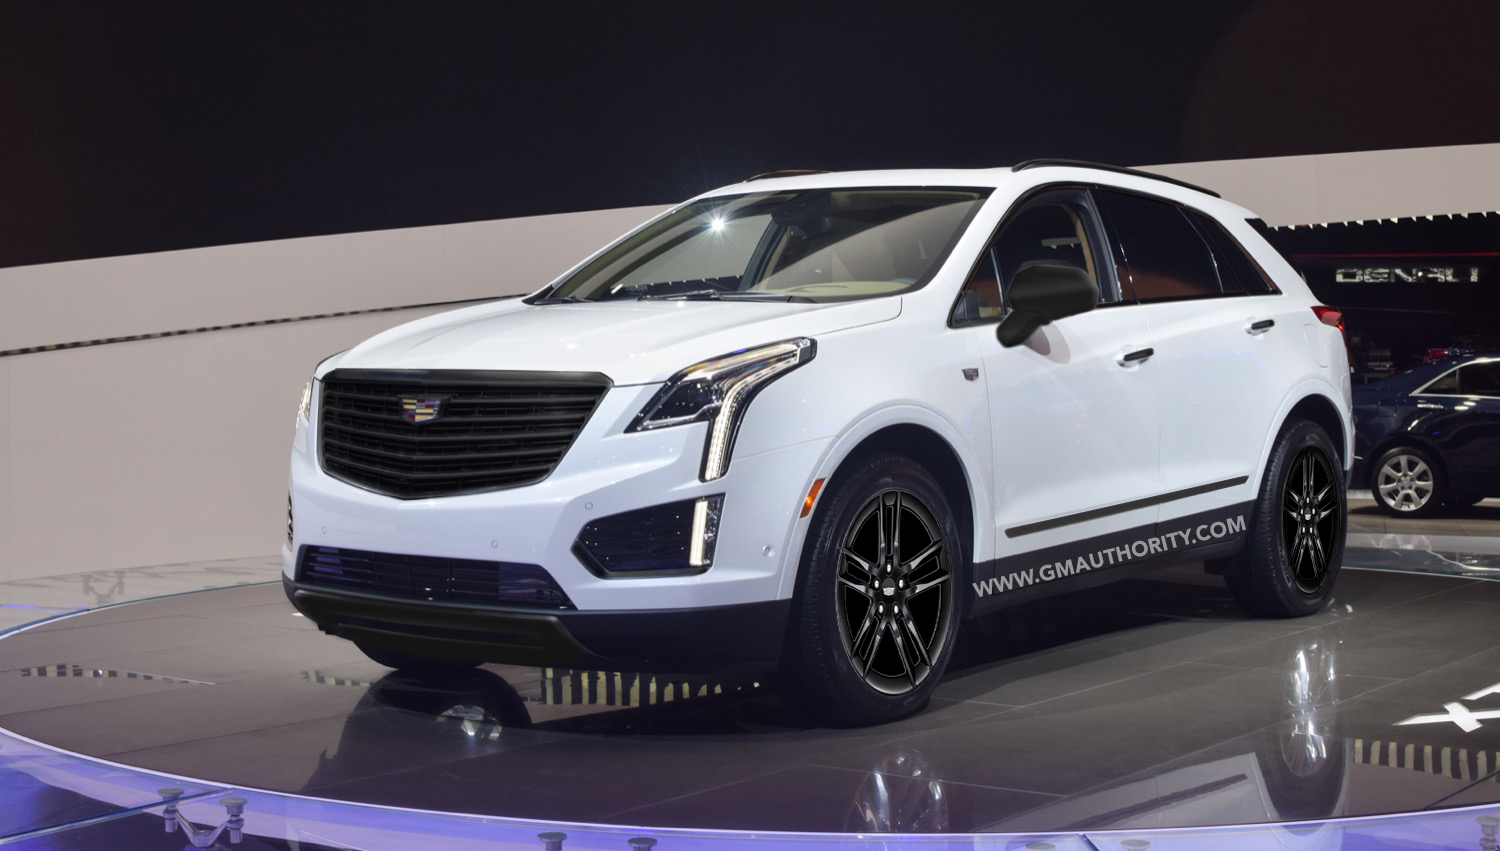 We Render The Cadillac XT5 Midnight Edition, But This Time In White